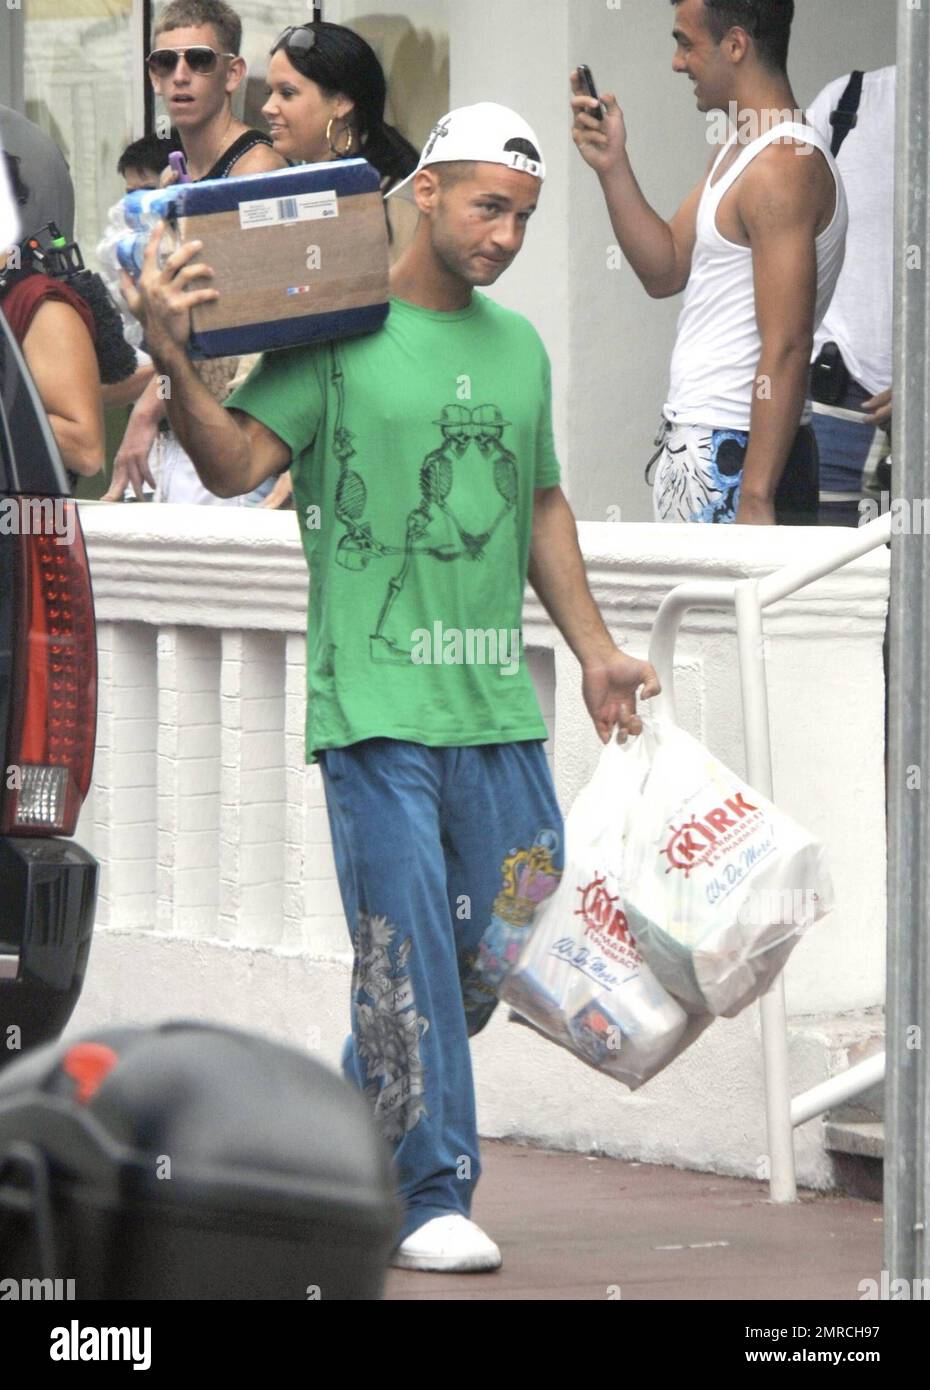 EXCLUSIVE!! 'Jersey Shore's' Mike 'The Situation' Sorrentino and DJ Pauly D carry some groceries into their temporary home after a major grocery shopping trip. Miami Beach, FL. 4/11/10. Stock Photo